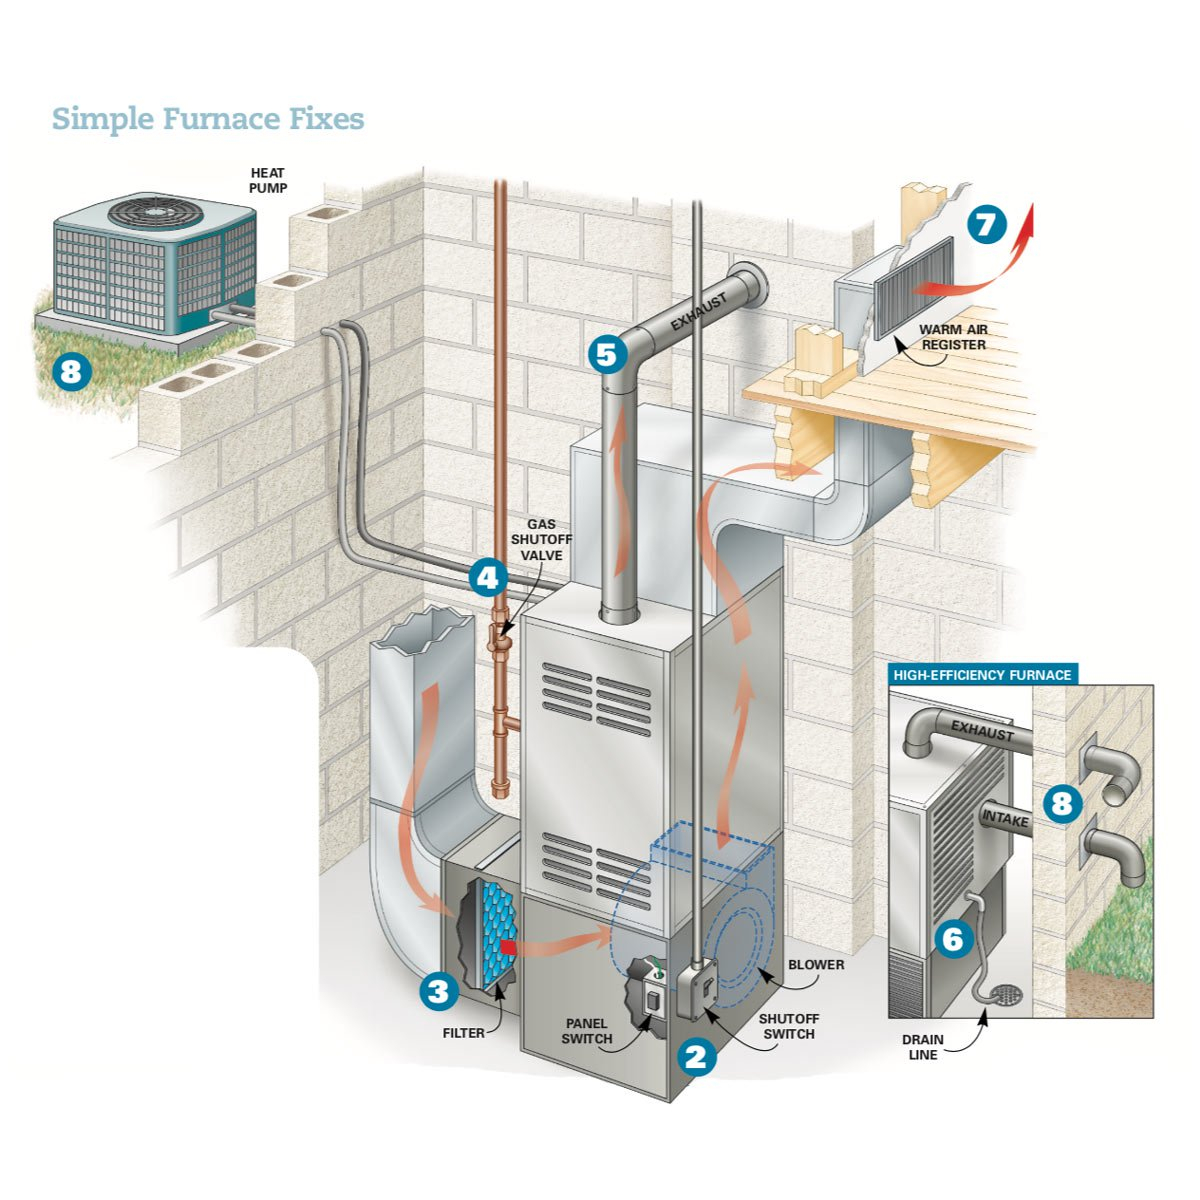 High Efficiency Furnace Venting Diagram Simple Furnace Fixes Family Handyman